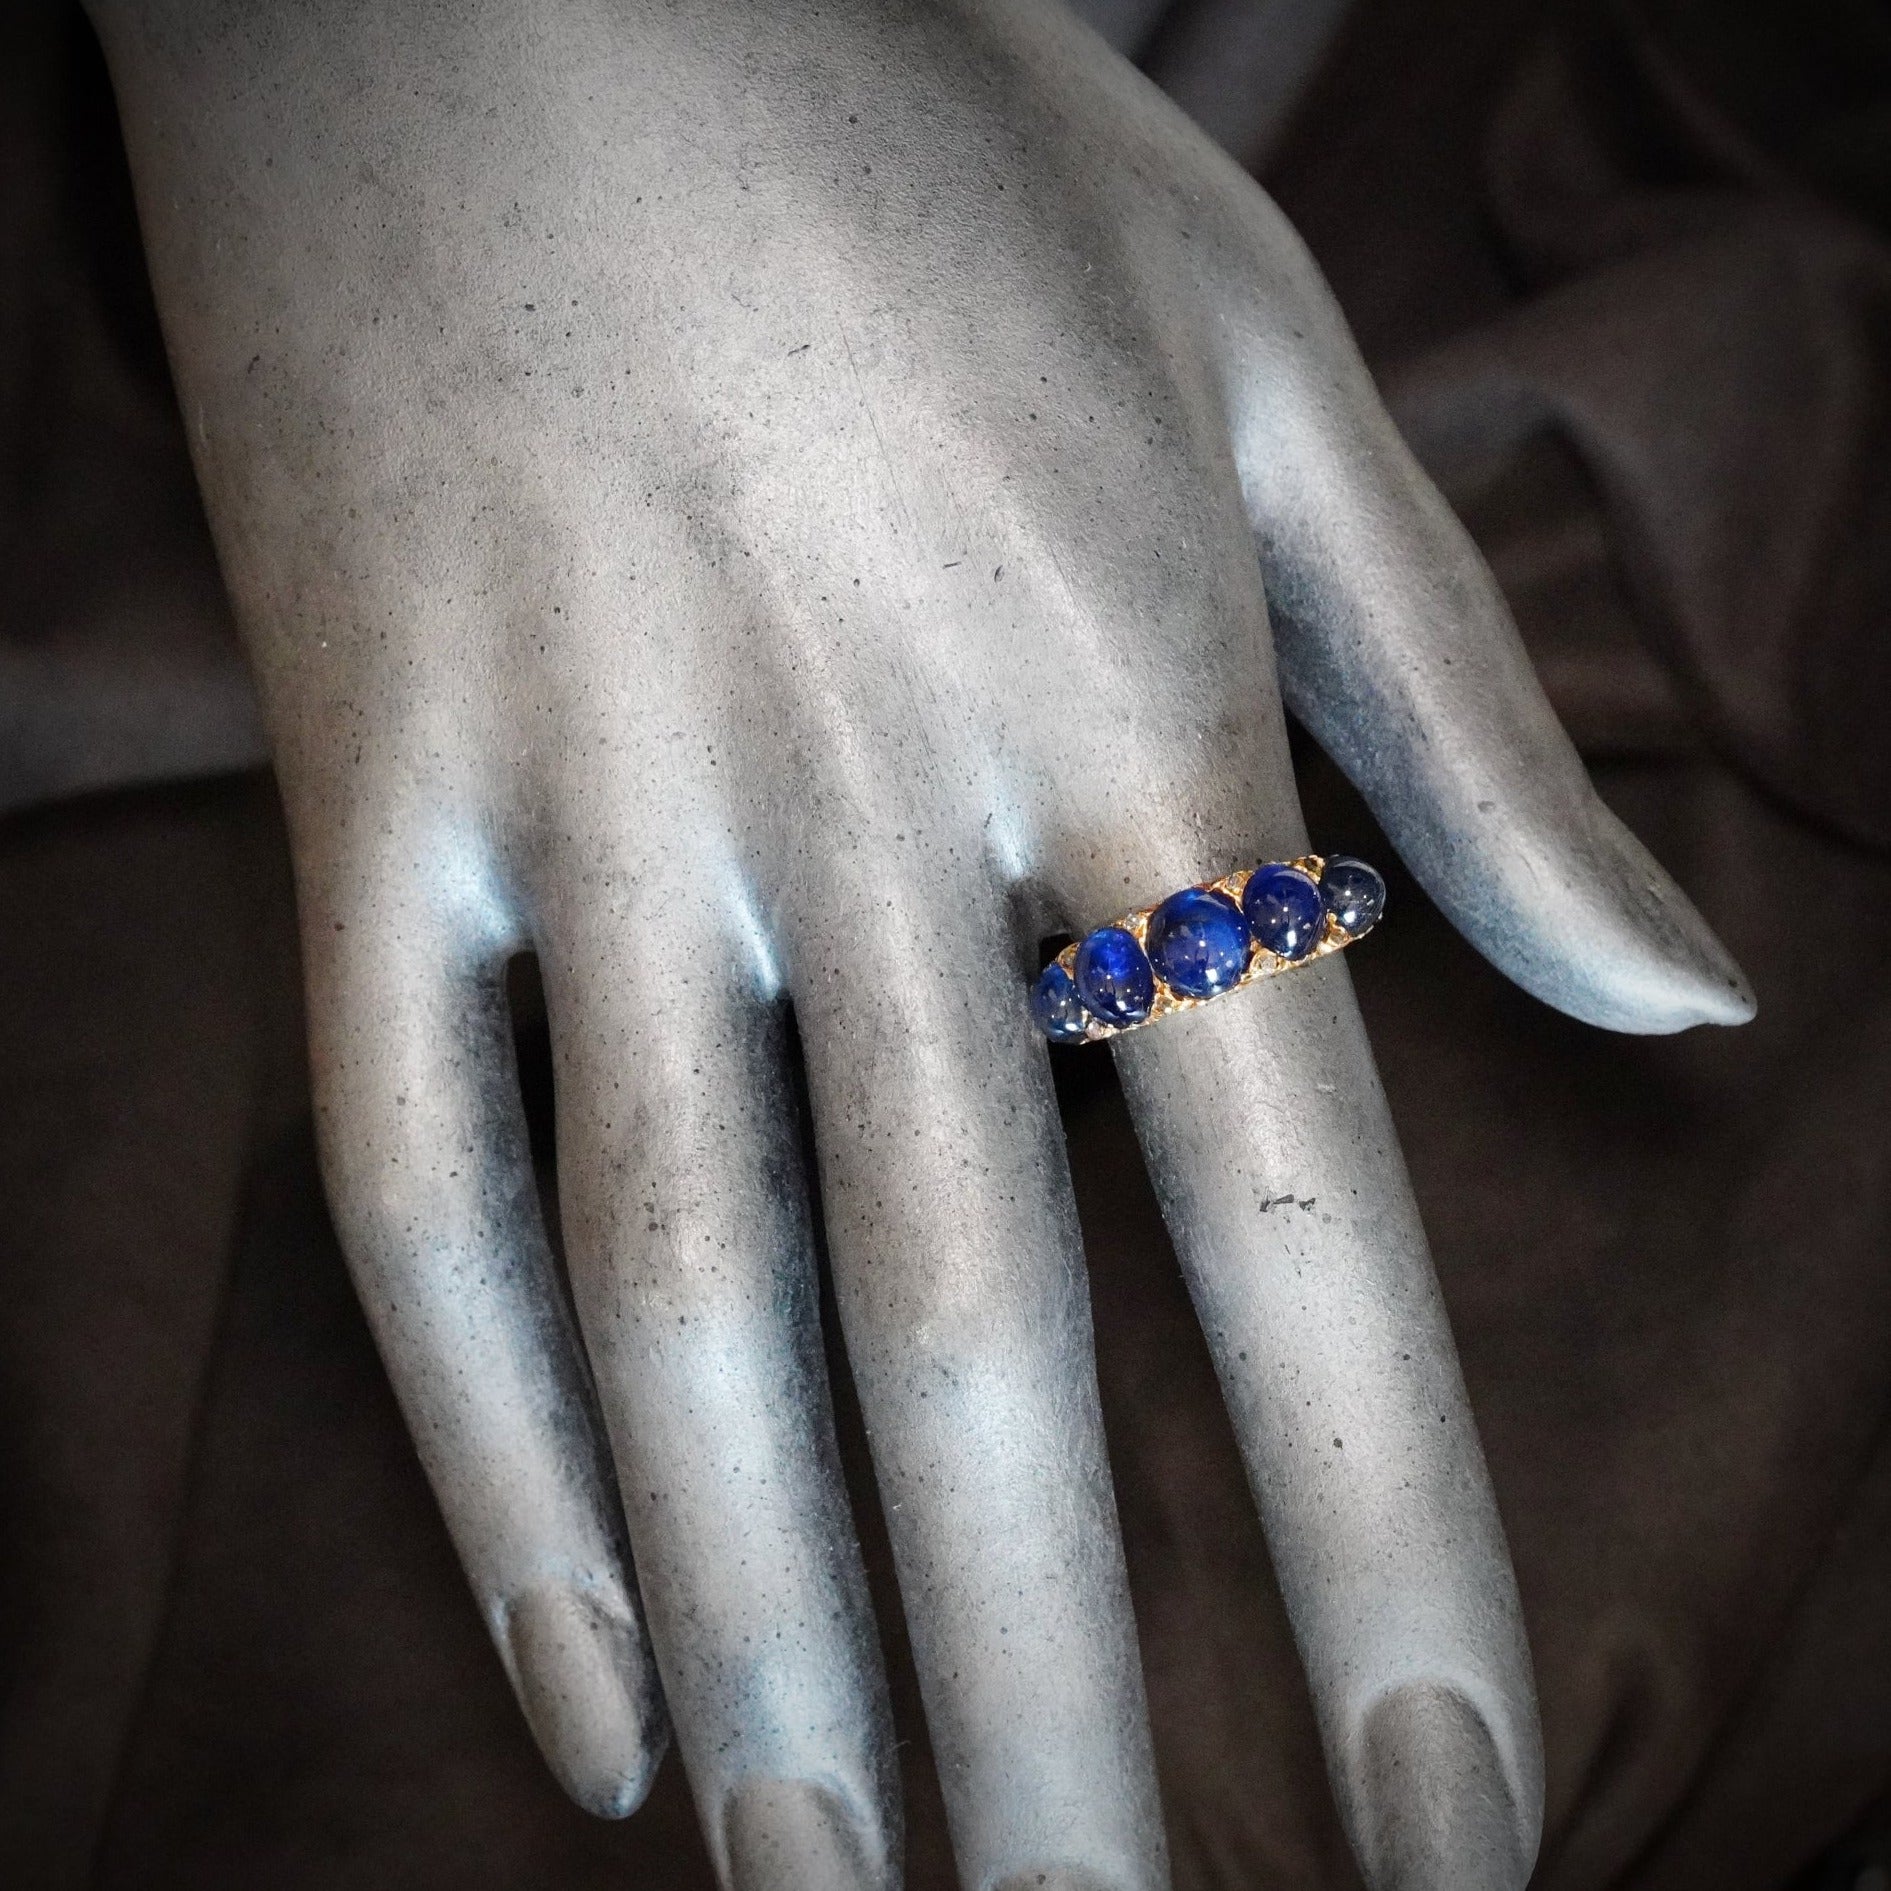 Victorian Azure Magic: A Five-Sapphire Ring Set in 18K Yellow Gold